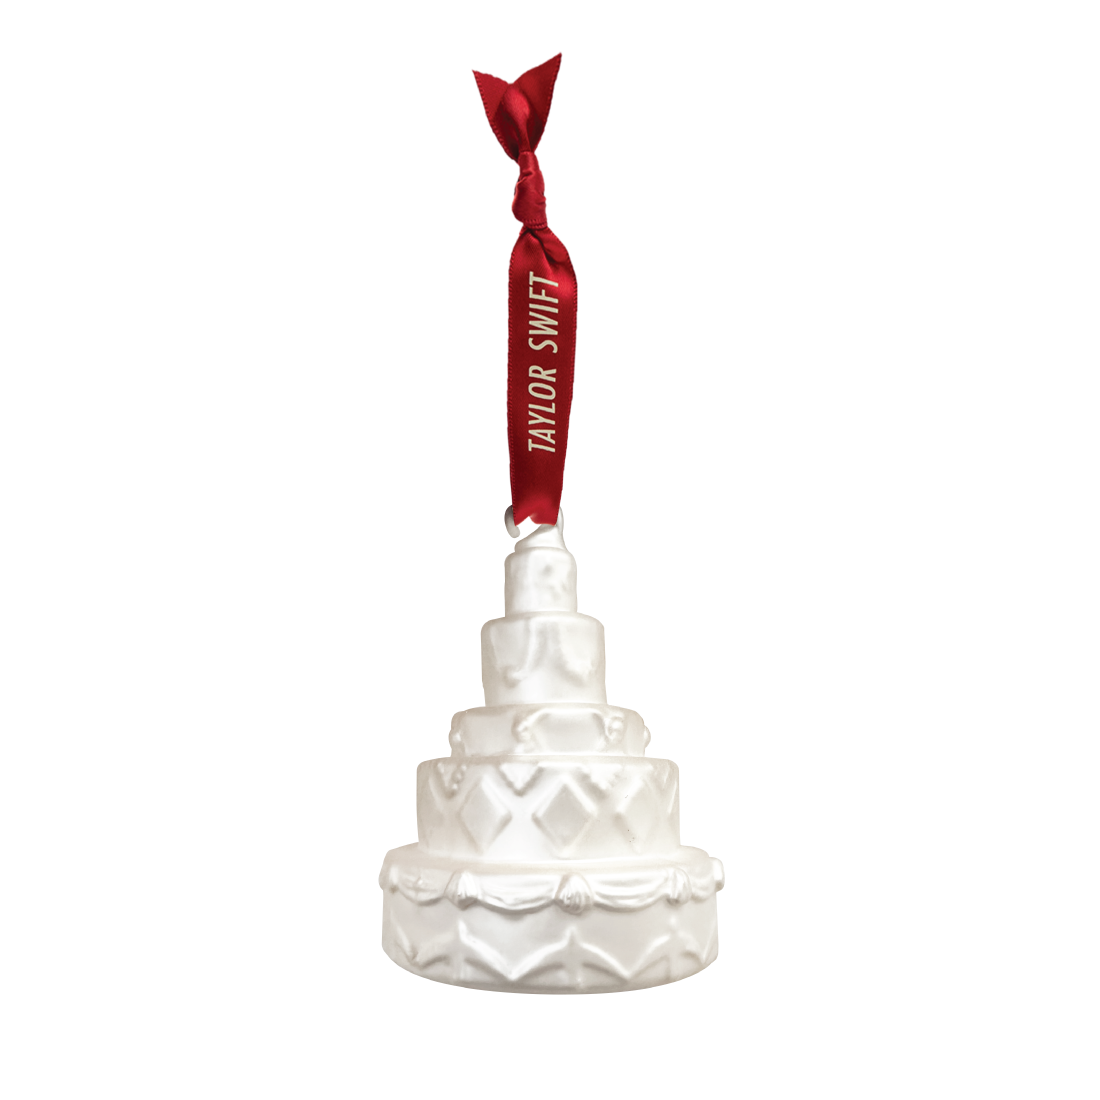 Taylor Swift - Red (Taylor's Version) Cake Ornament